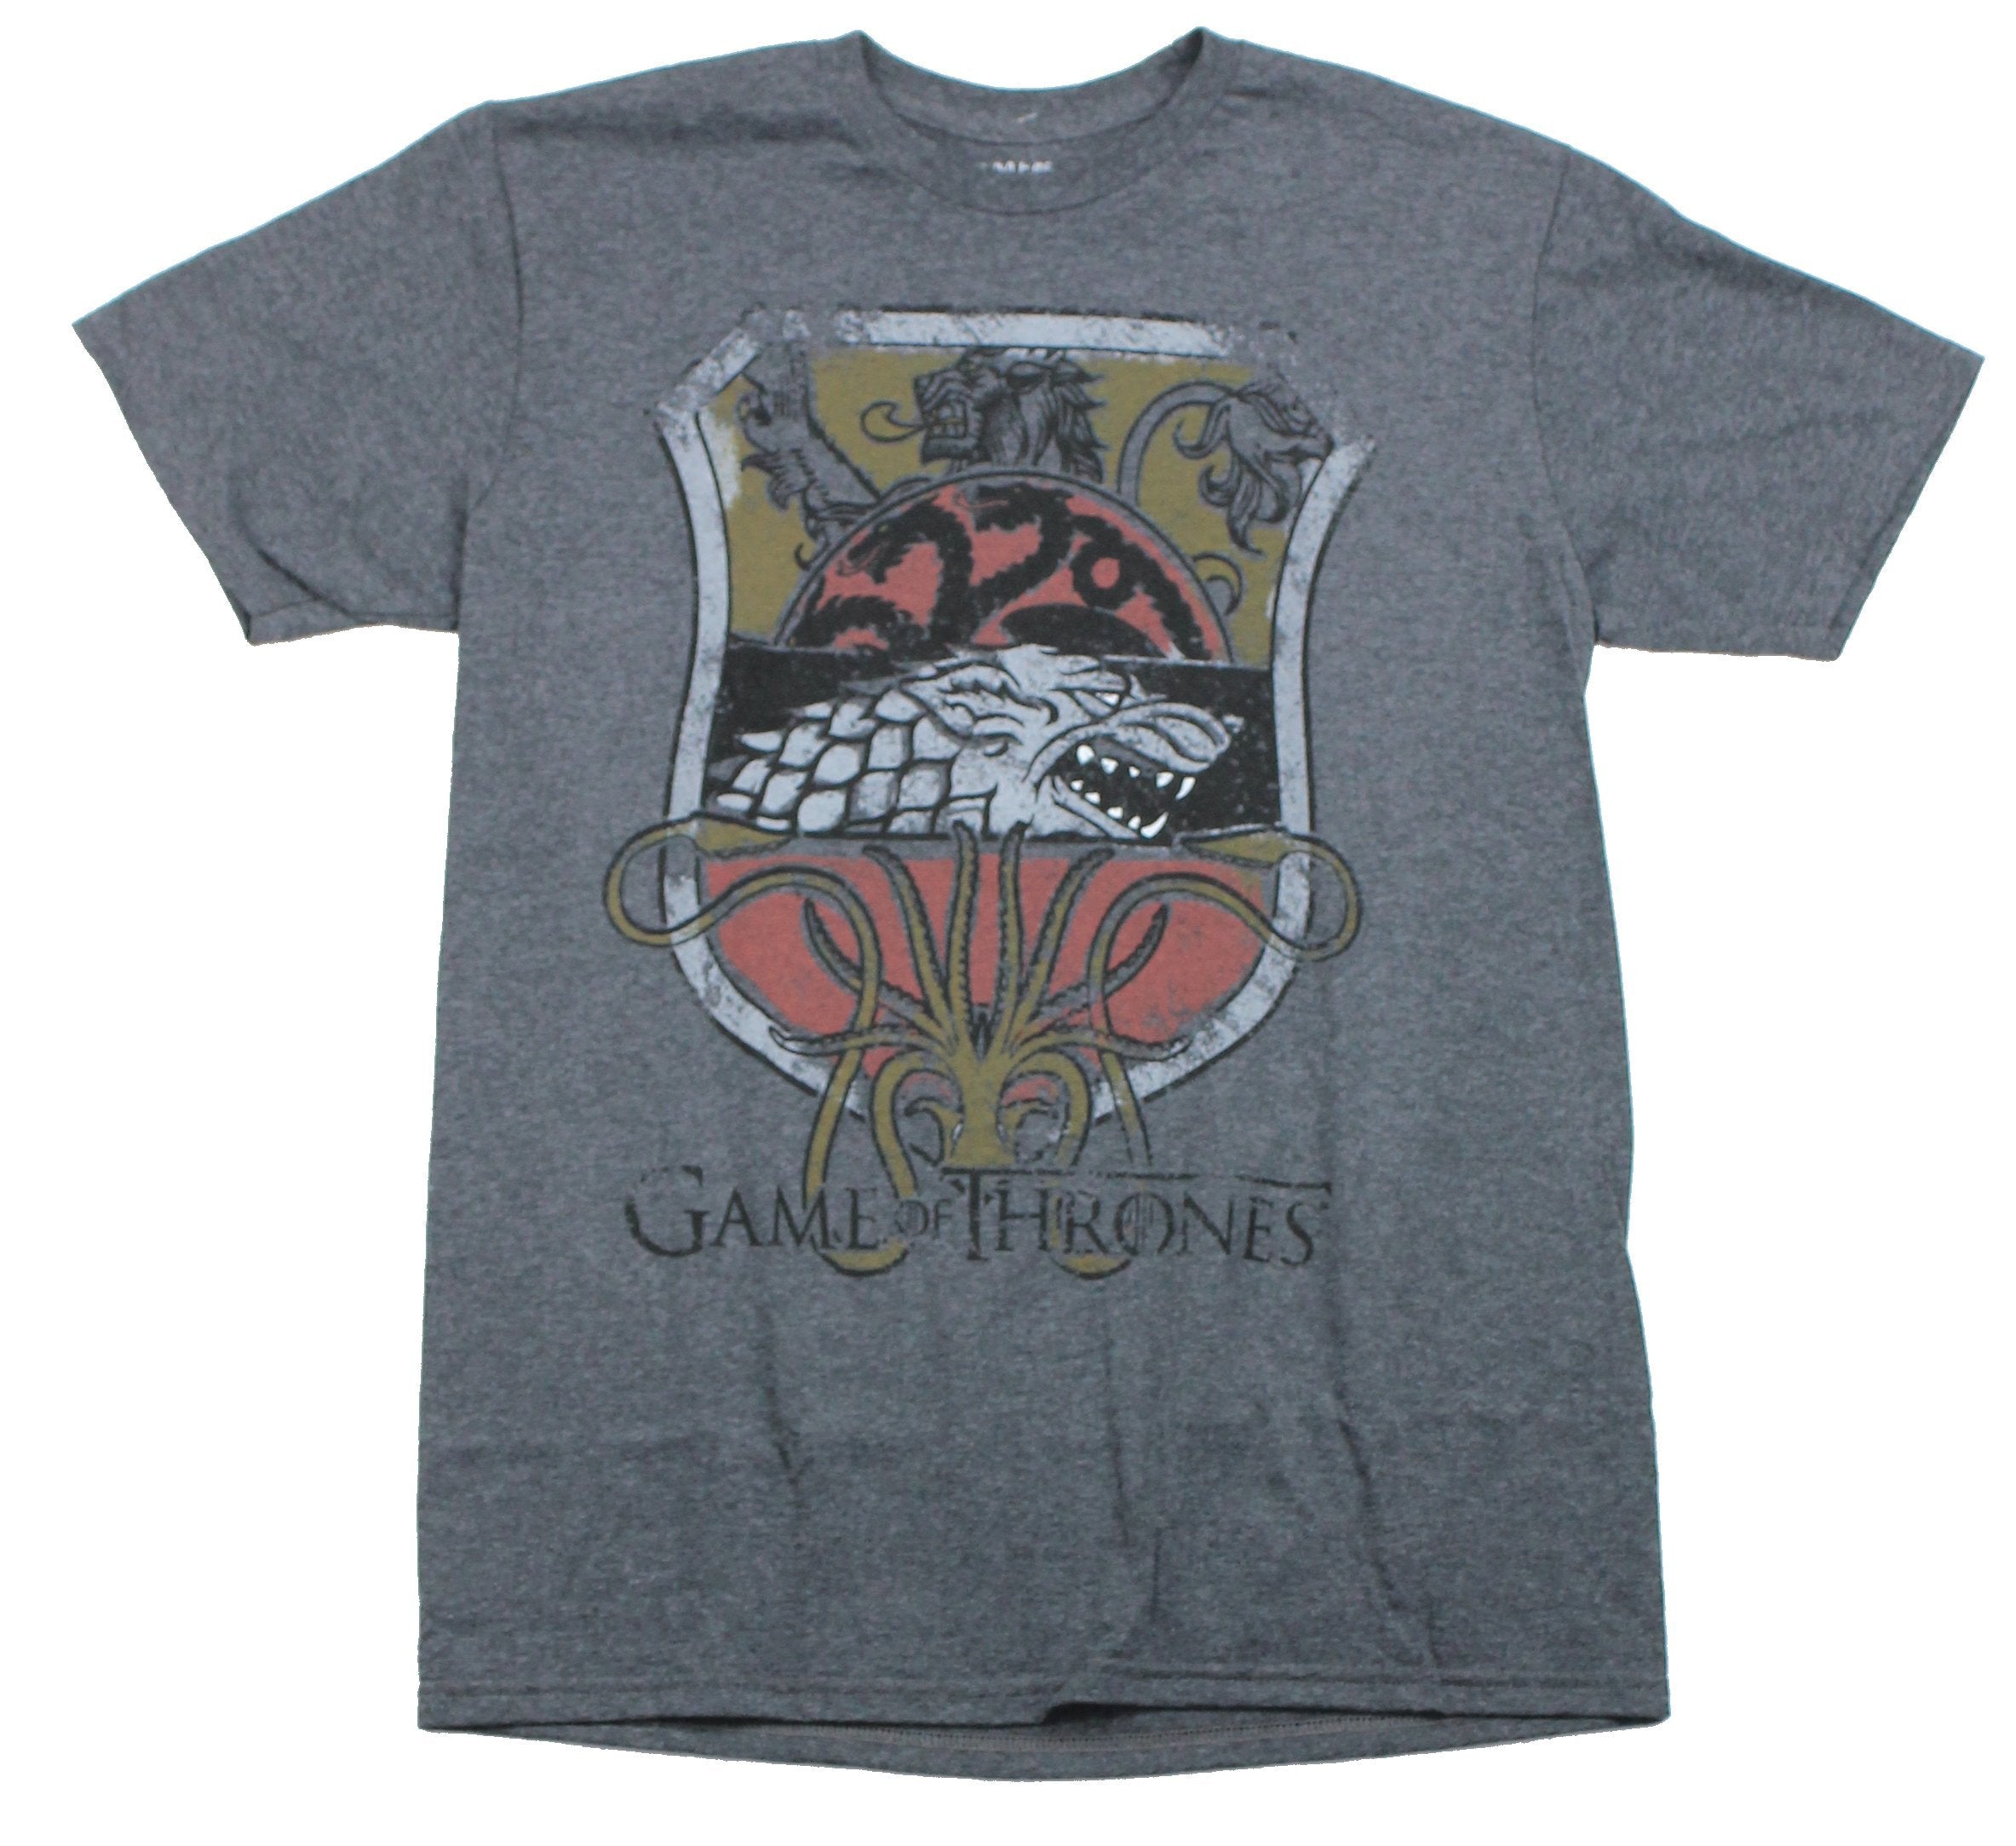 Game of Thrones Mens T-Shirt - Stark Grayjoy Lanister Crest Distressed Crest